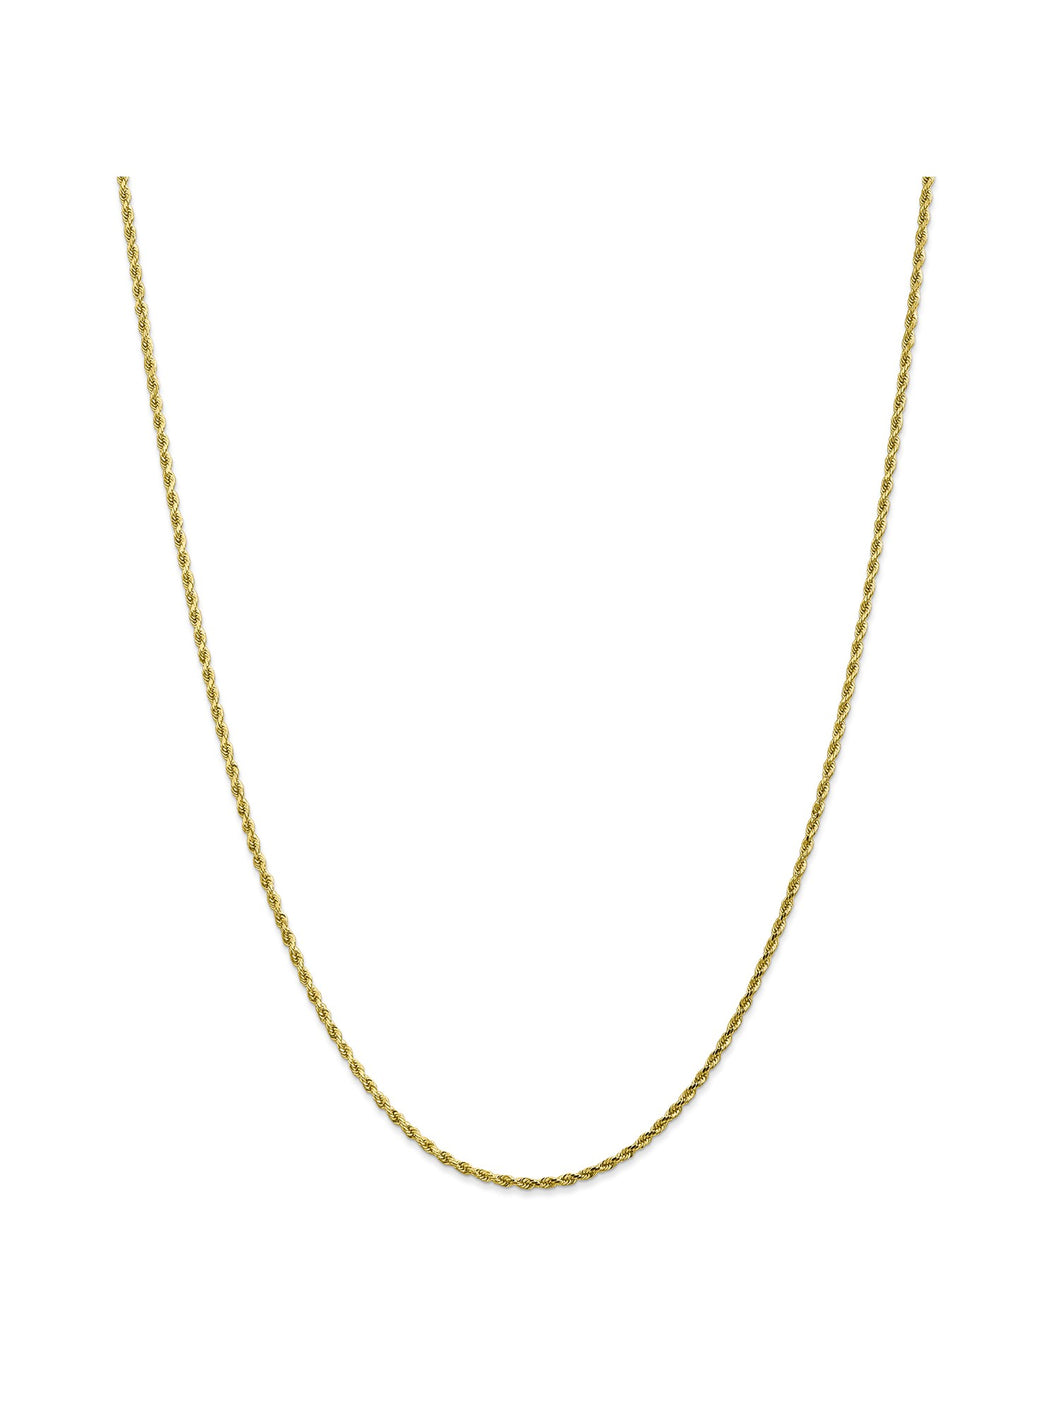 10k Yellow Gold 2mm Handmade Rope Chain Necklace